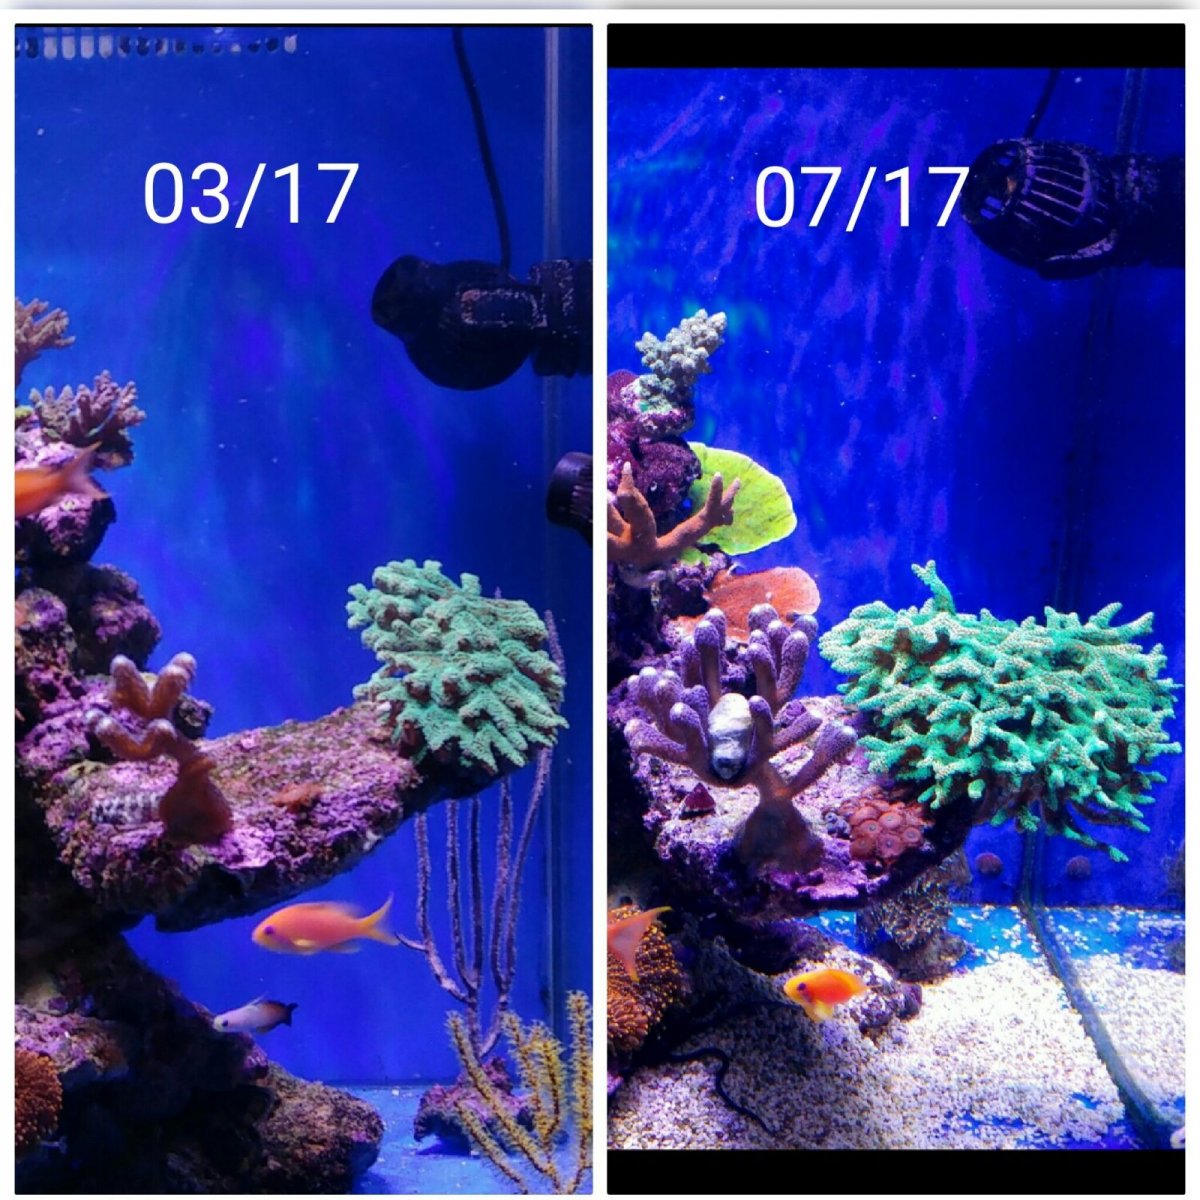 corals-under-LED-before-after-e1508089934566.jpg